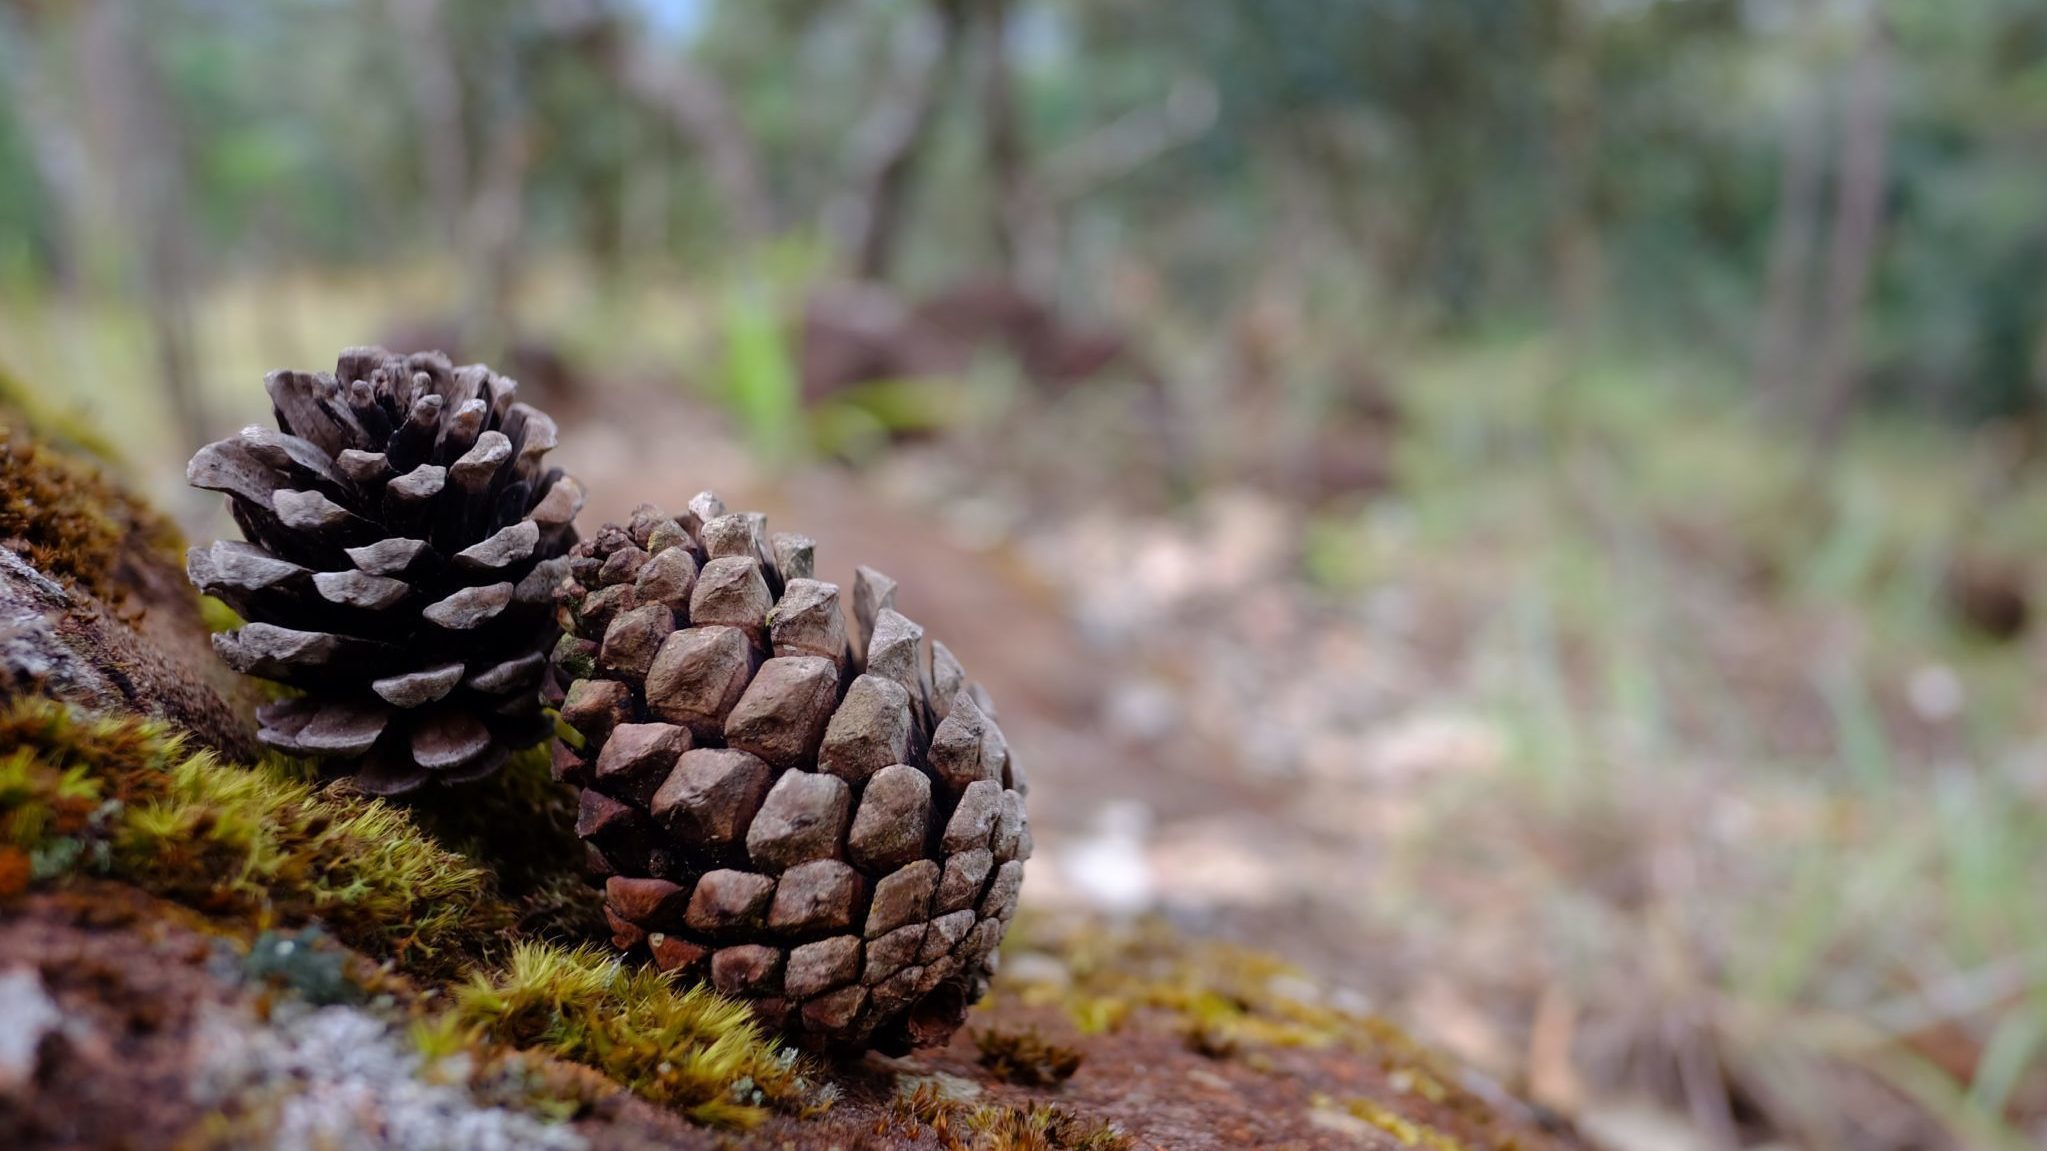 Two pine cones on a mossy rock in the forest